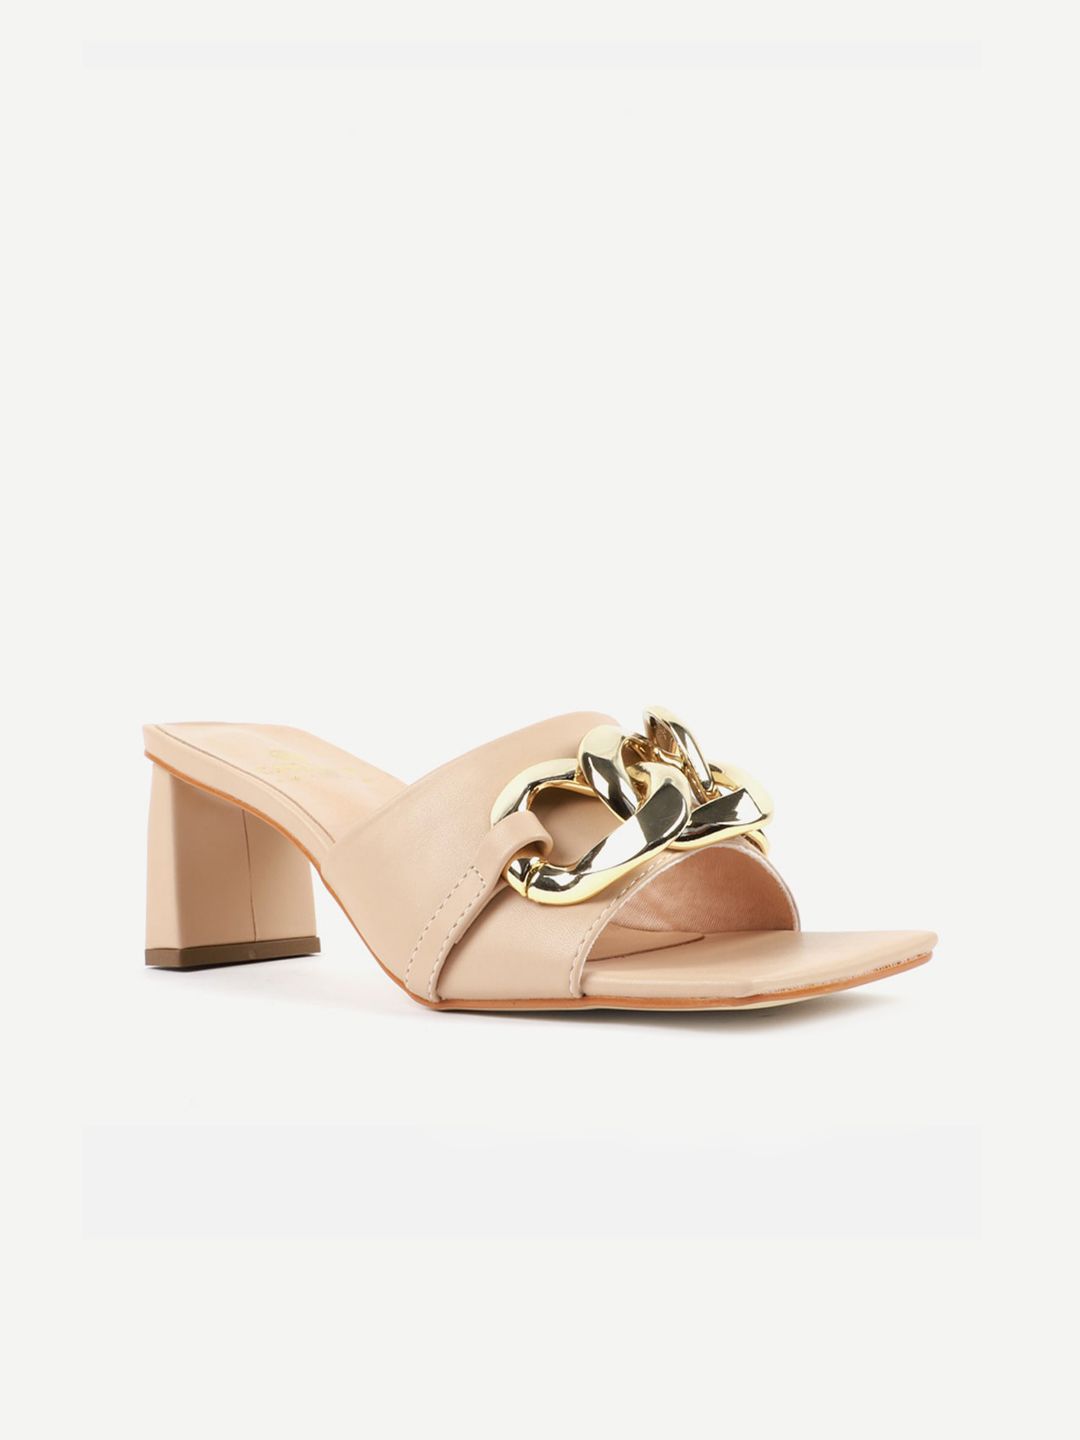 Carlton London Nude-Coloured Block Mules with Buckles Price in India